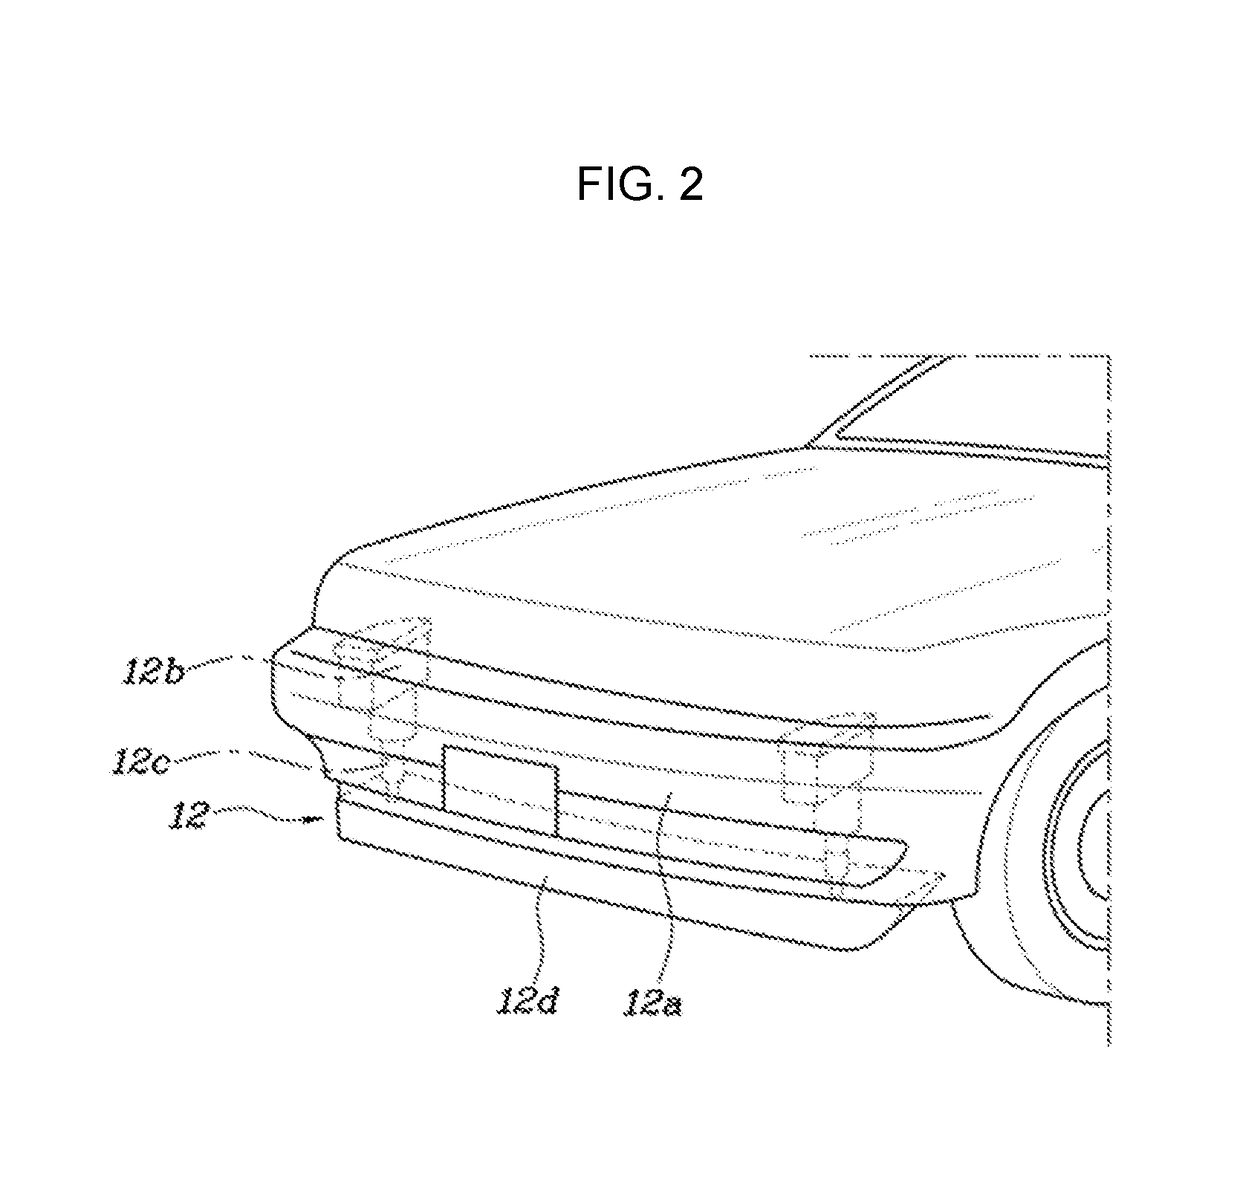 Vehicular spoiler system to adjust airflow based on environmental factor